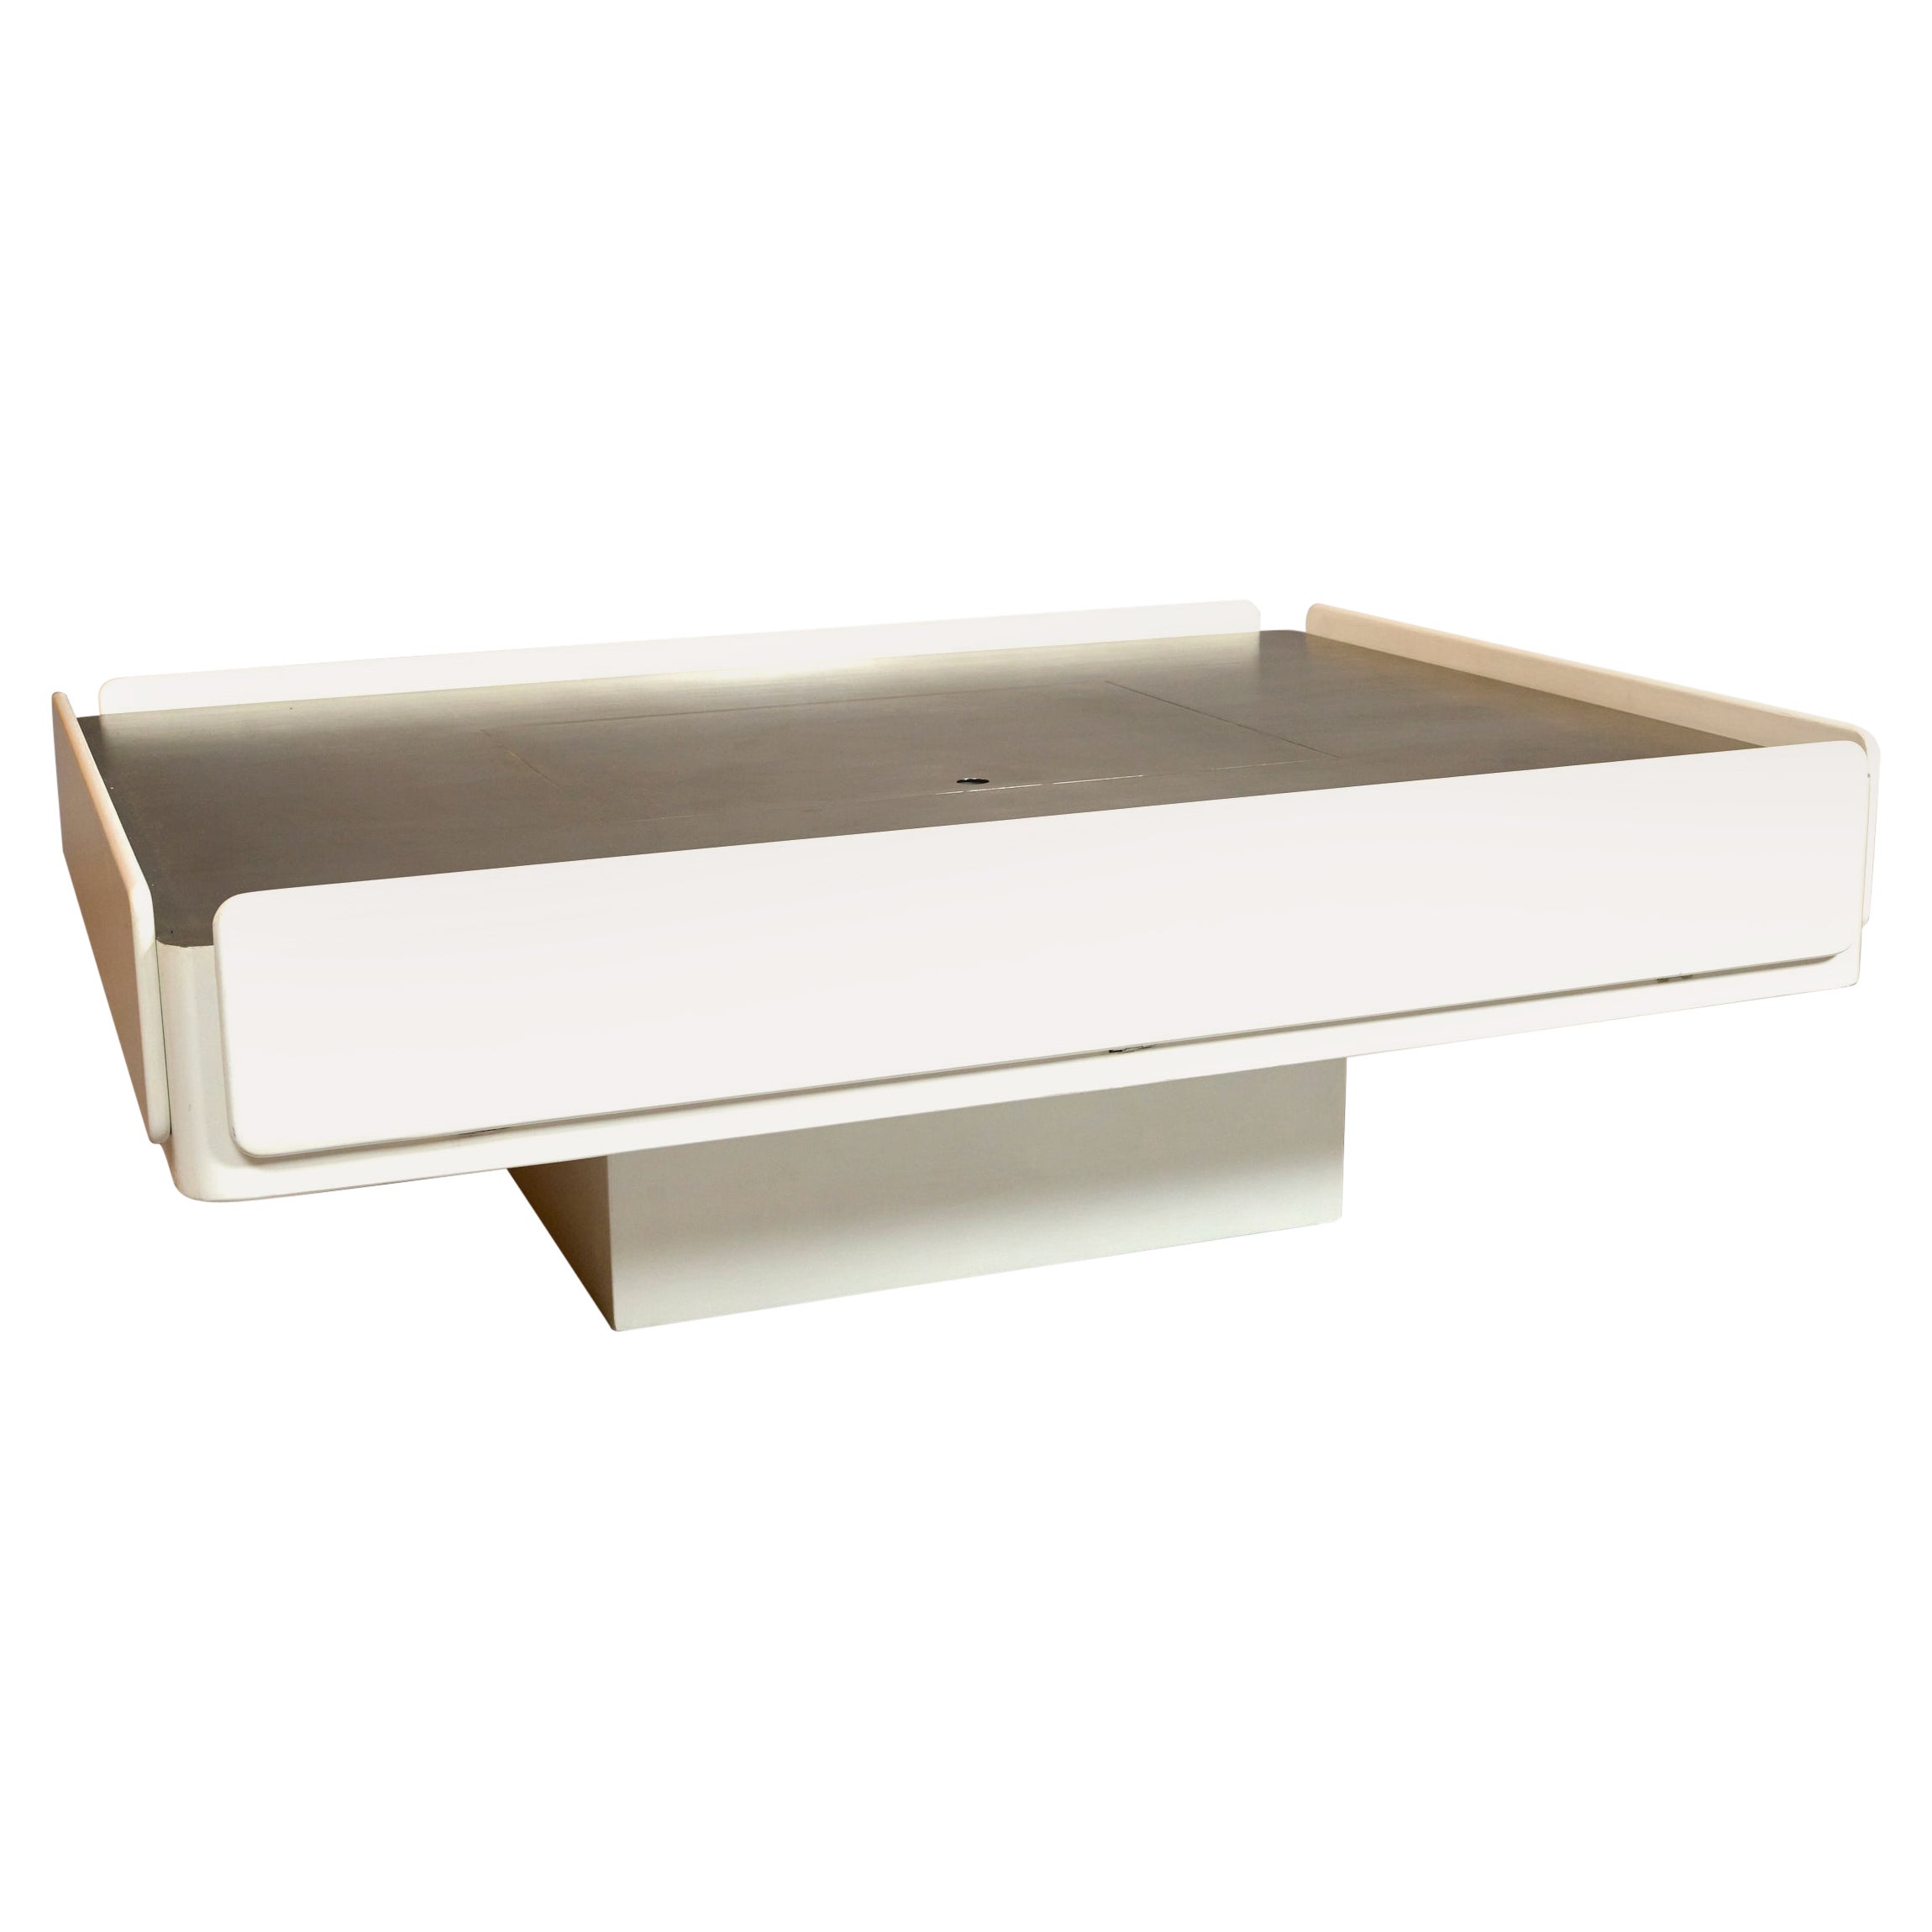 'Caori' Coffee Table by Vico Magistreti for Gavina with Concealed Storage For Sale